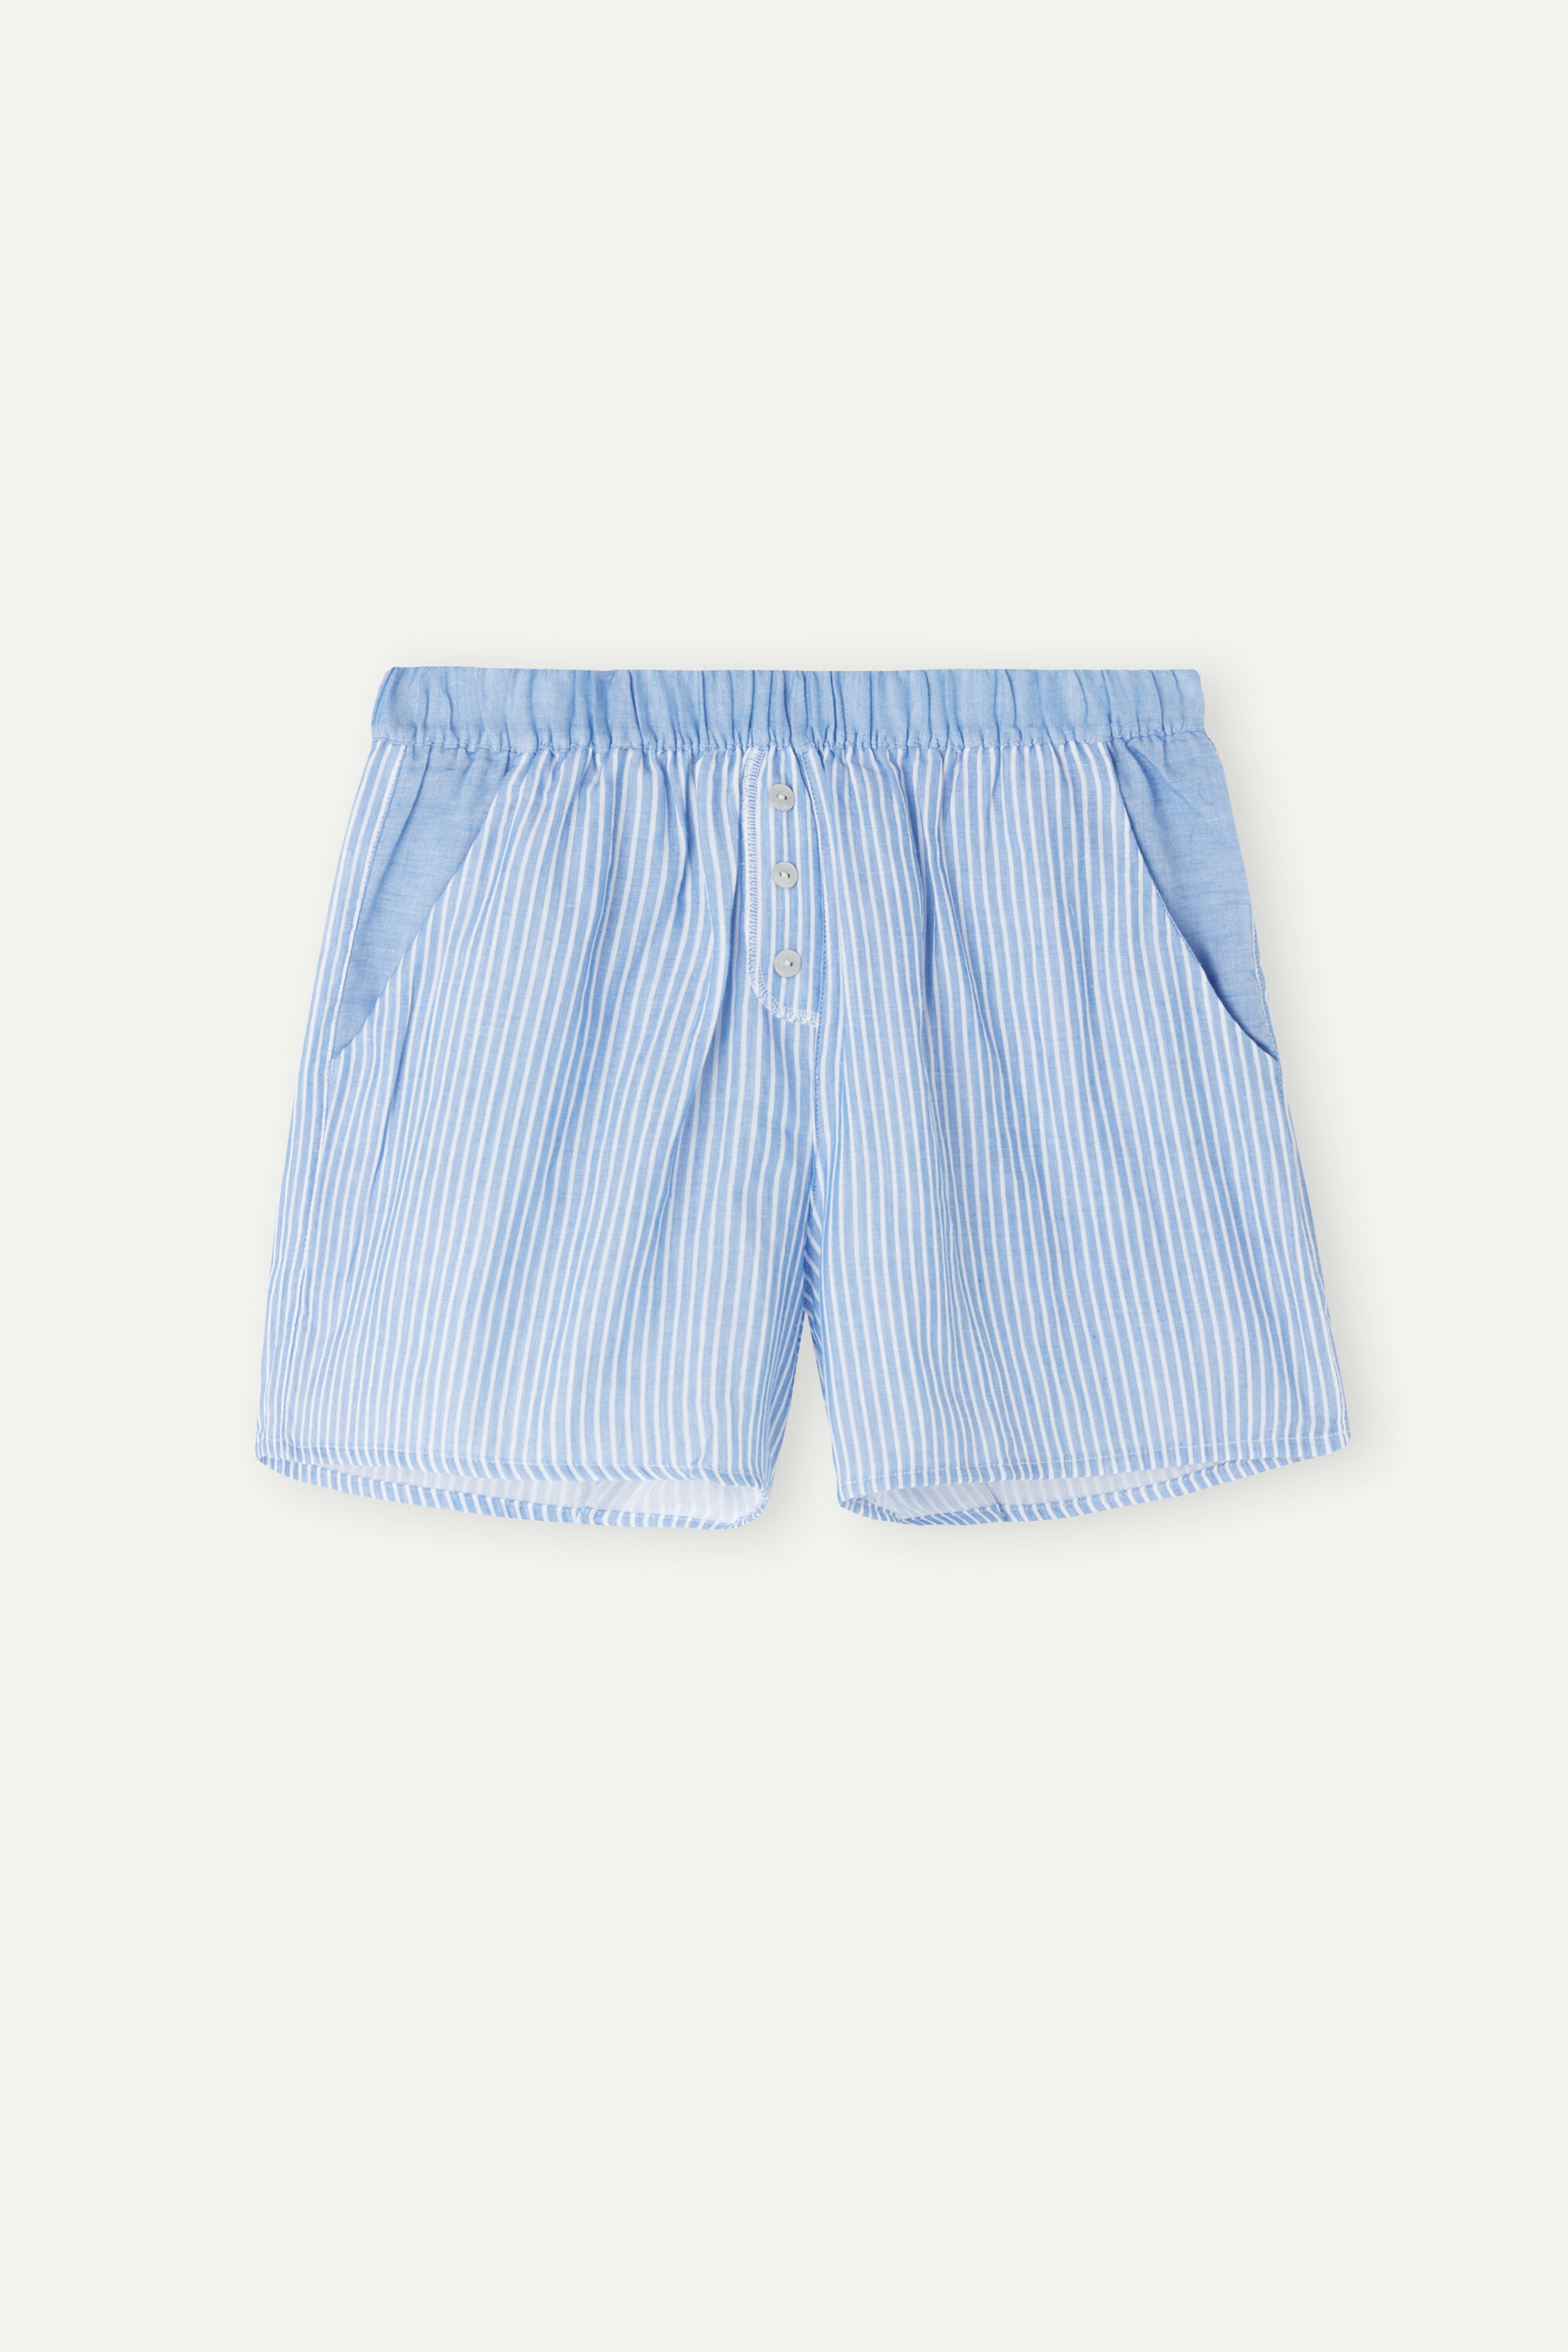 Early in the Morning Cotton Cloth Shorts | Intimissimi